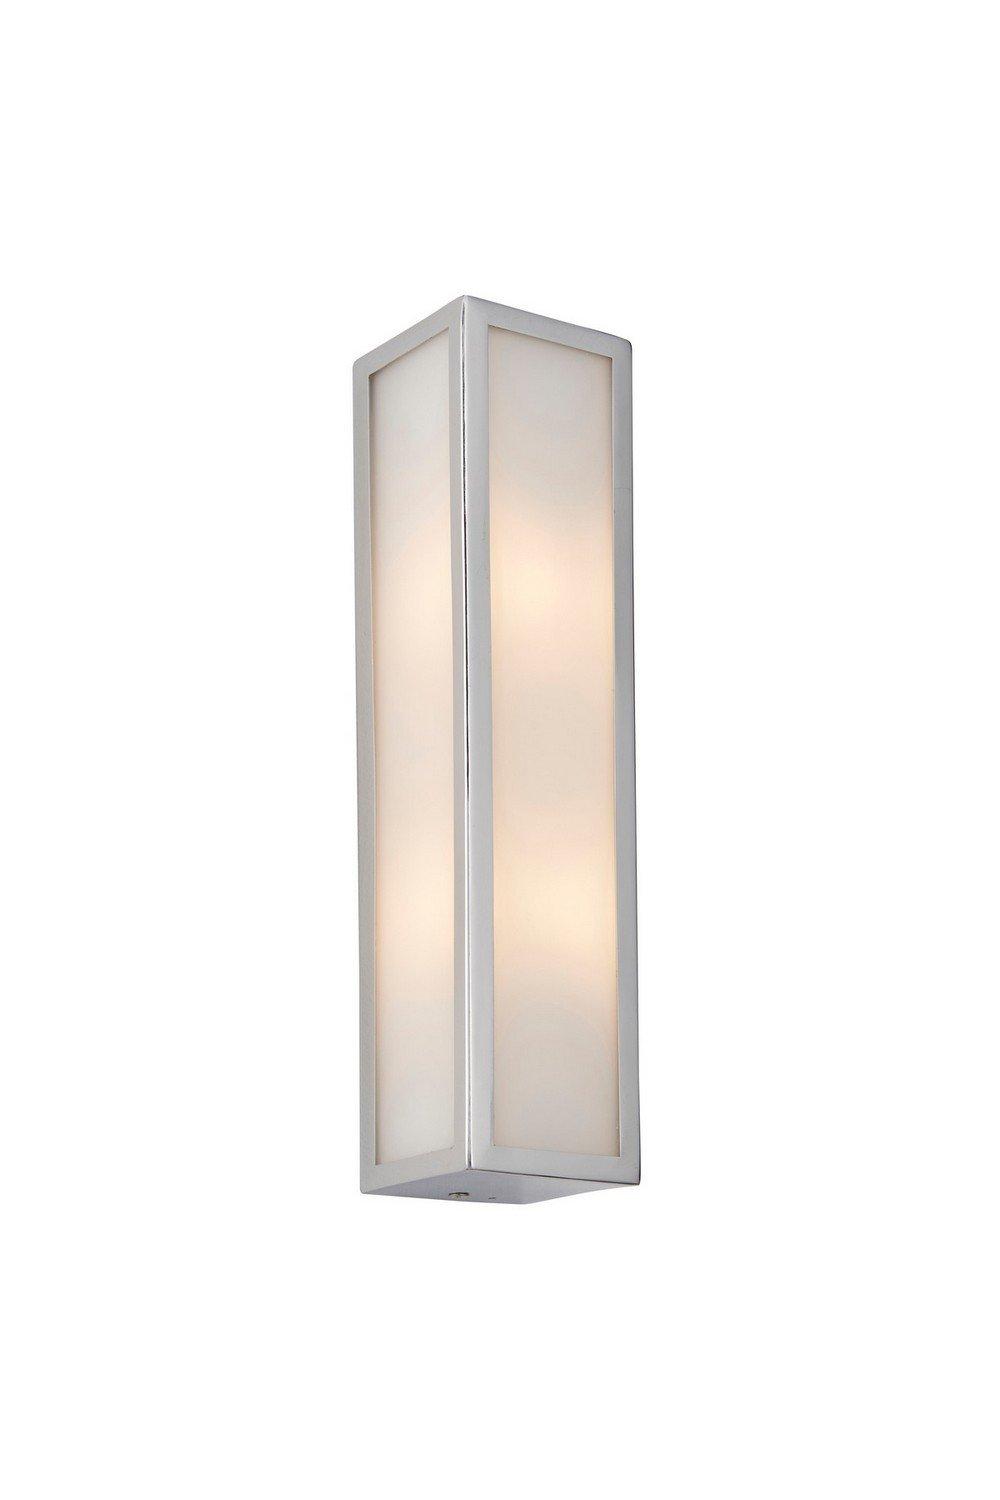 Newham Outdoor Contemporary 2 Light Wall Lamp Chrome Frosted Glass